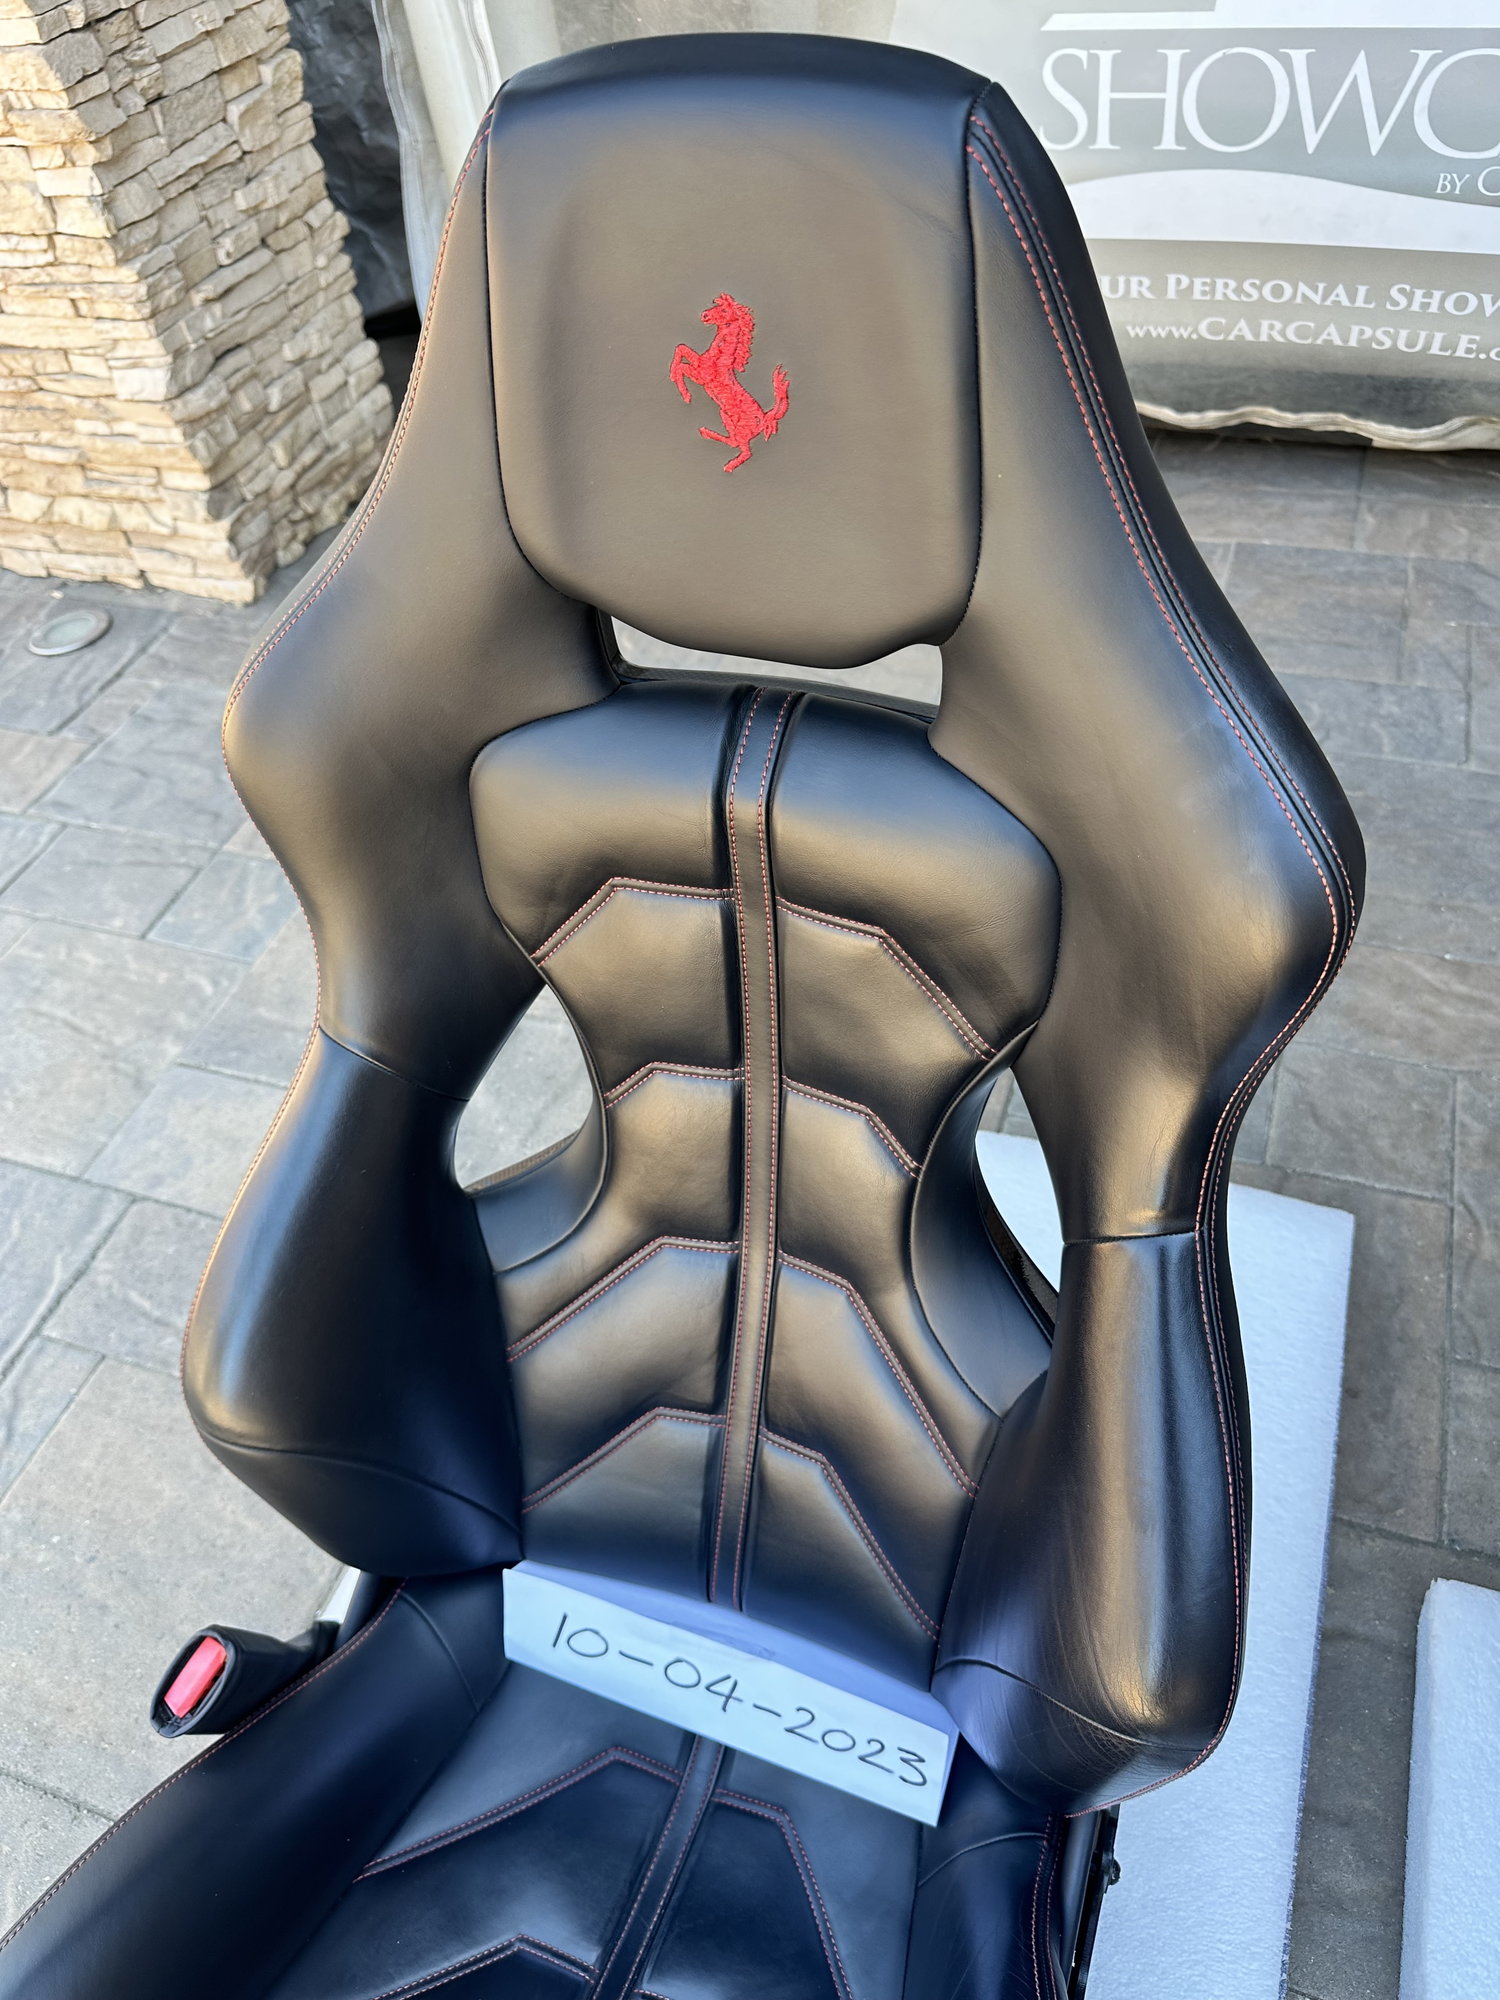 Interior/Upholstery - Ferrari 458 Racing Seats with Red Stitching  (Large size) - Used - -1 to 2024  All Models - -1 to 2024  All Models - North Hills, CA 91343, United States